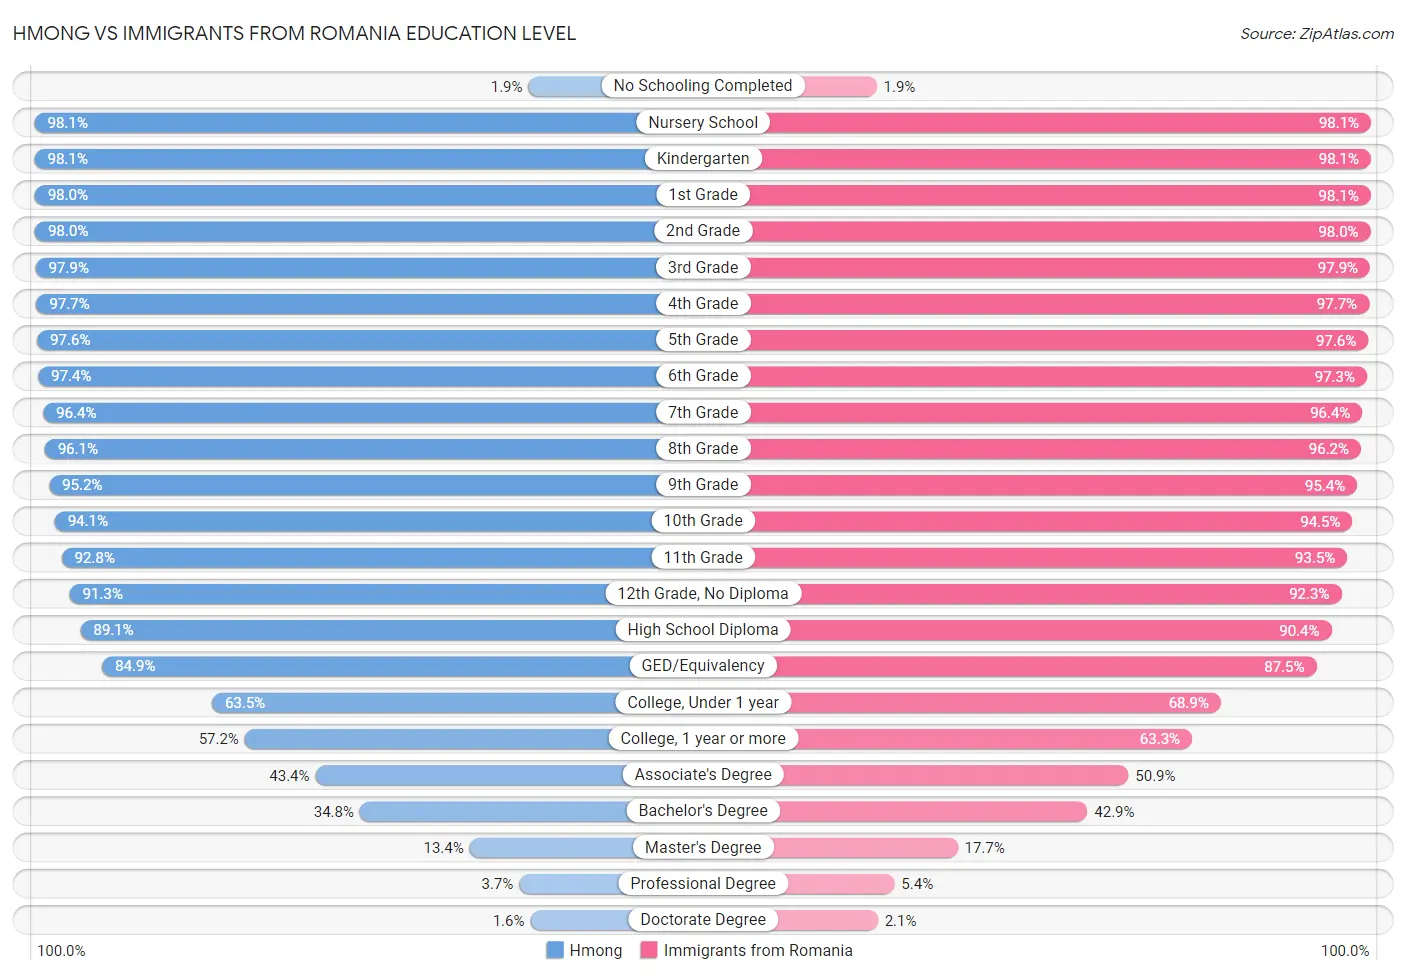 Hmong vs Immigrants from Romania Education Level